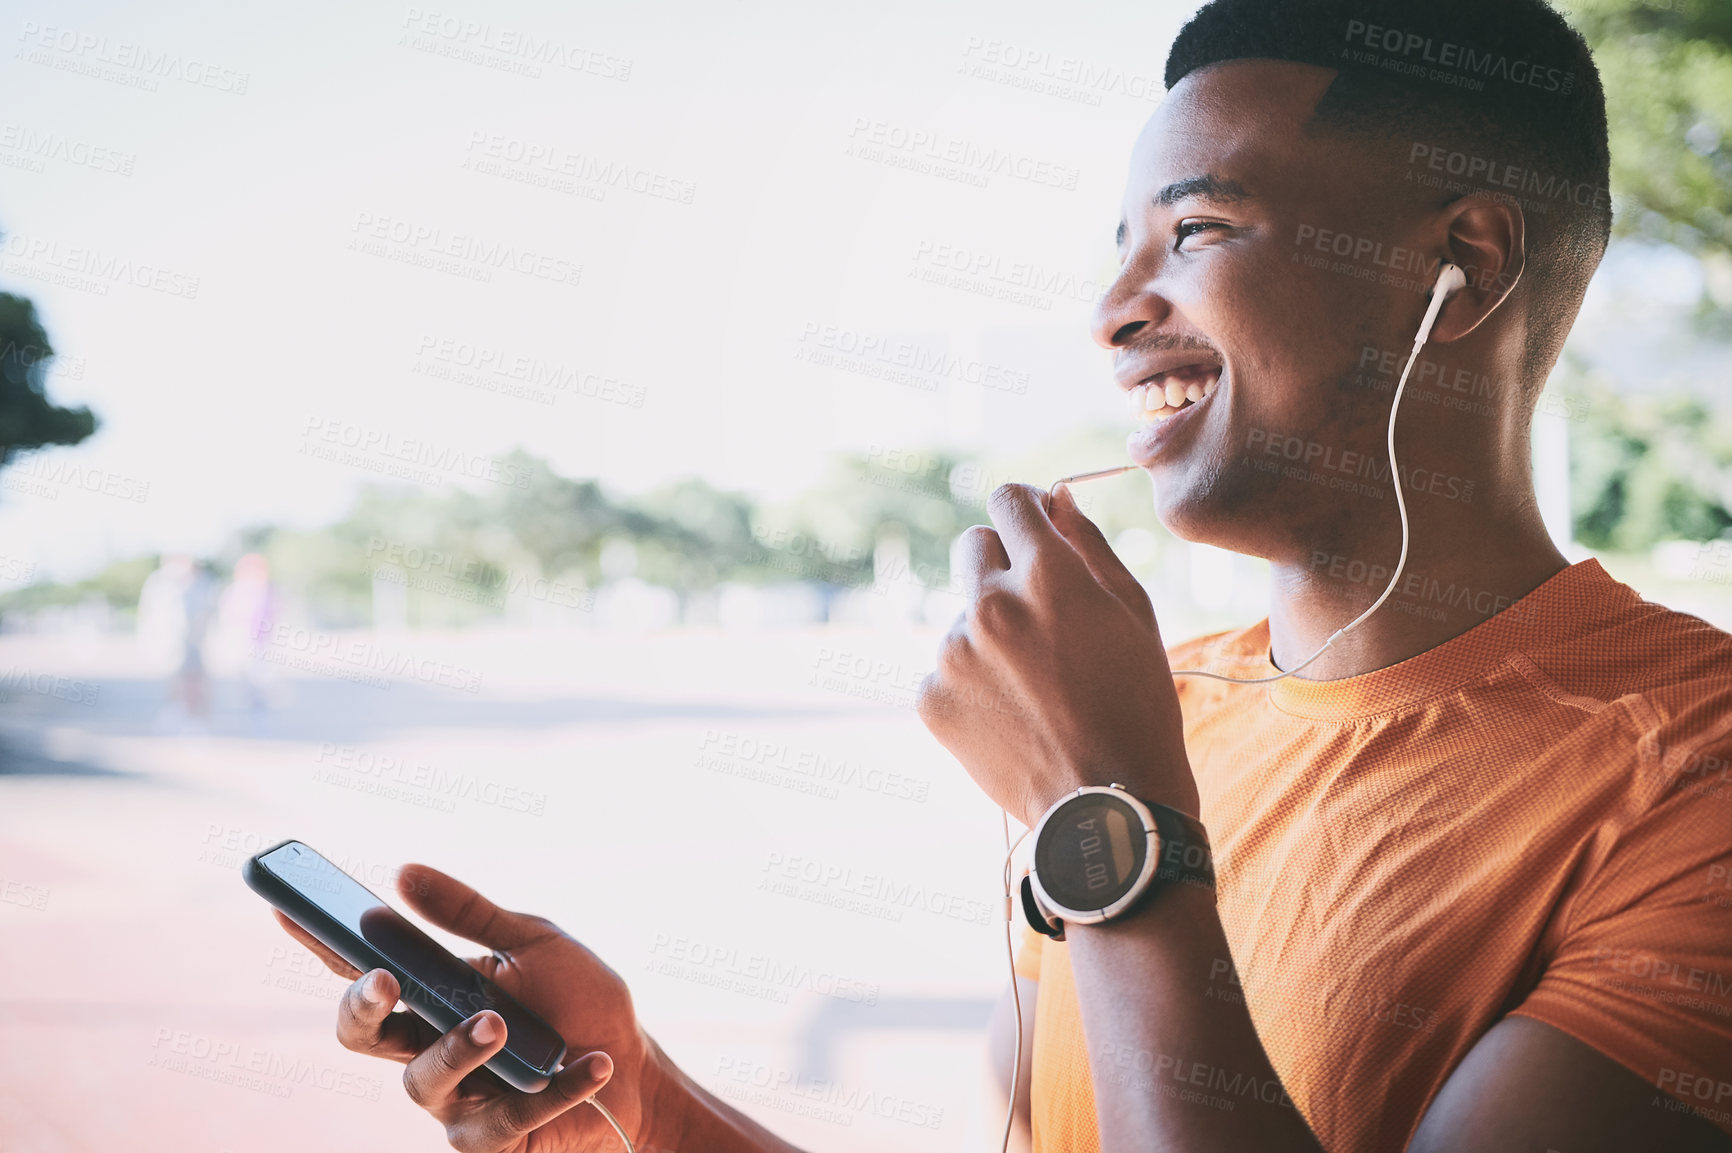 Buy stock photo Shot of a young man using a smartphone and earphones during a workout against an urban background